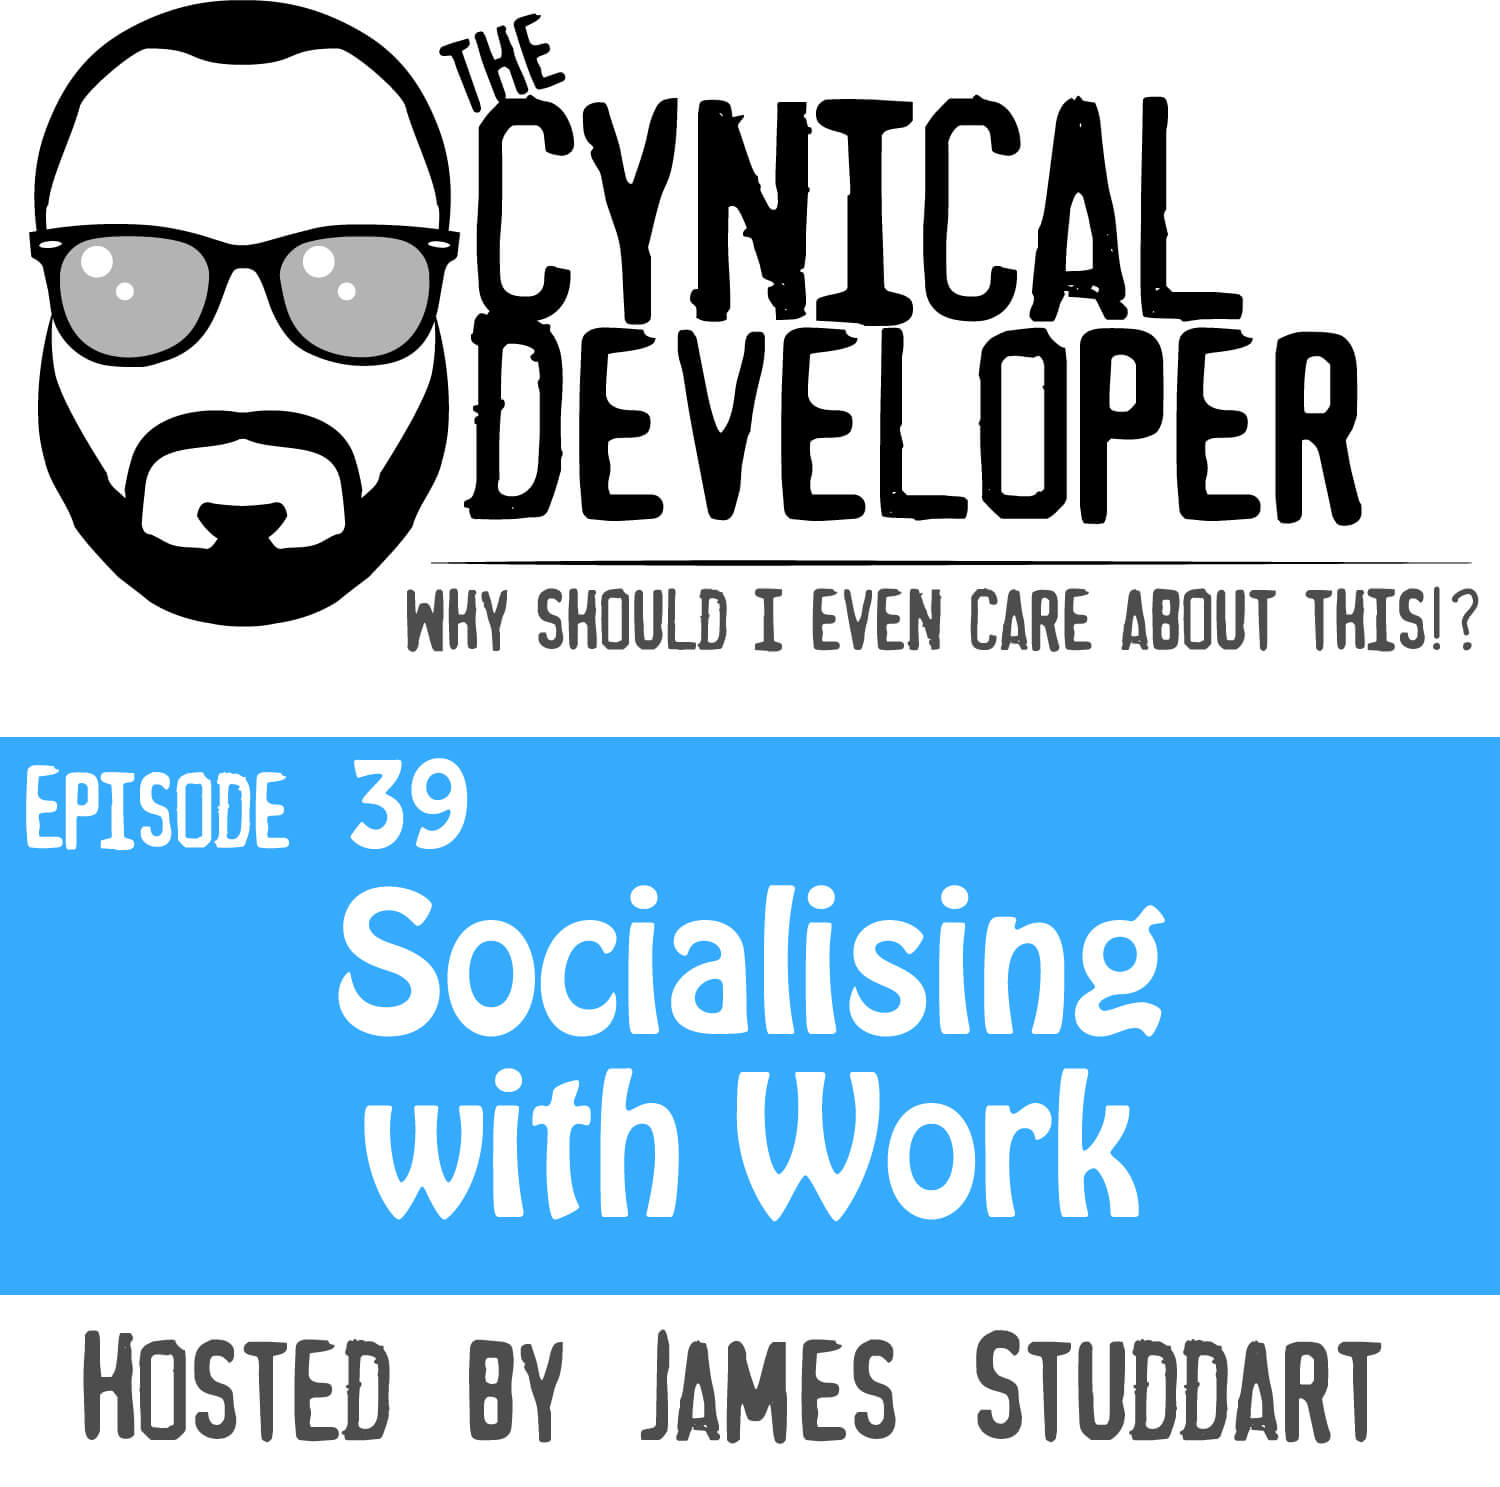 Episode 39 - Socialising with Work